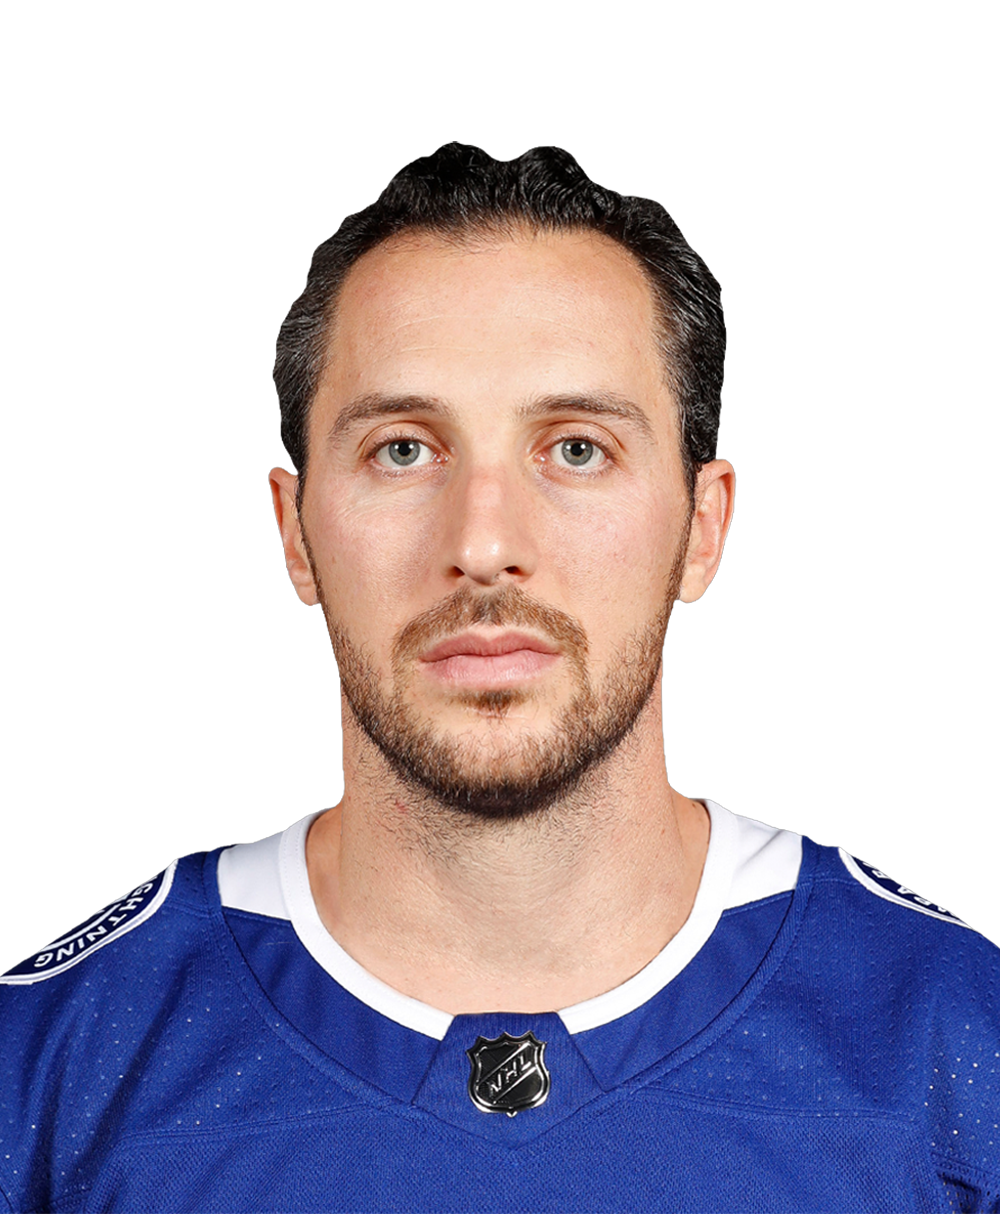 Ryan Callahan may be forced to retire from NHL